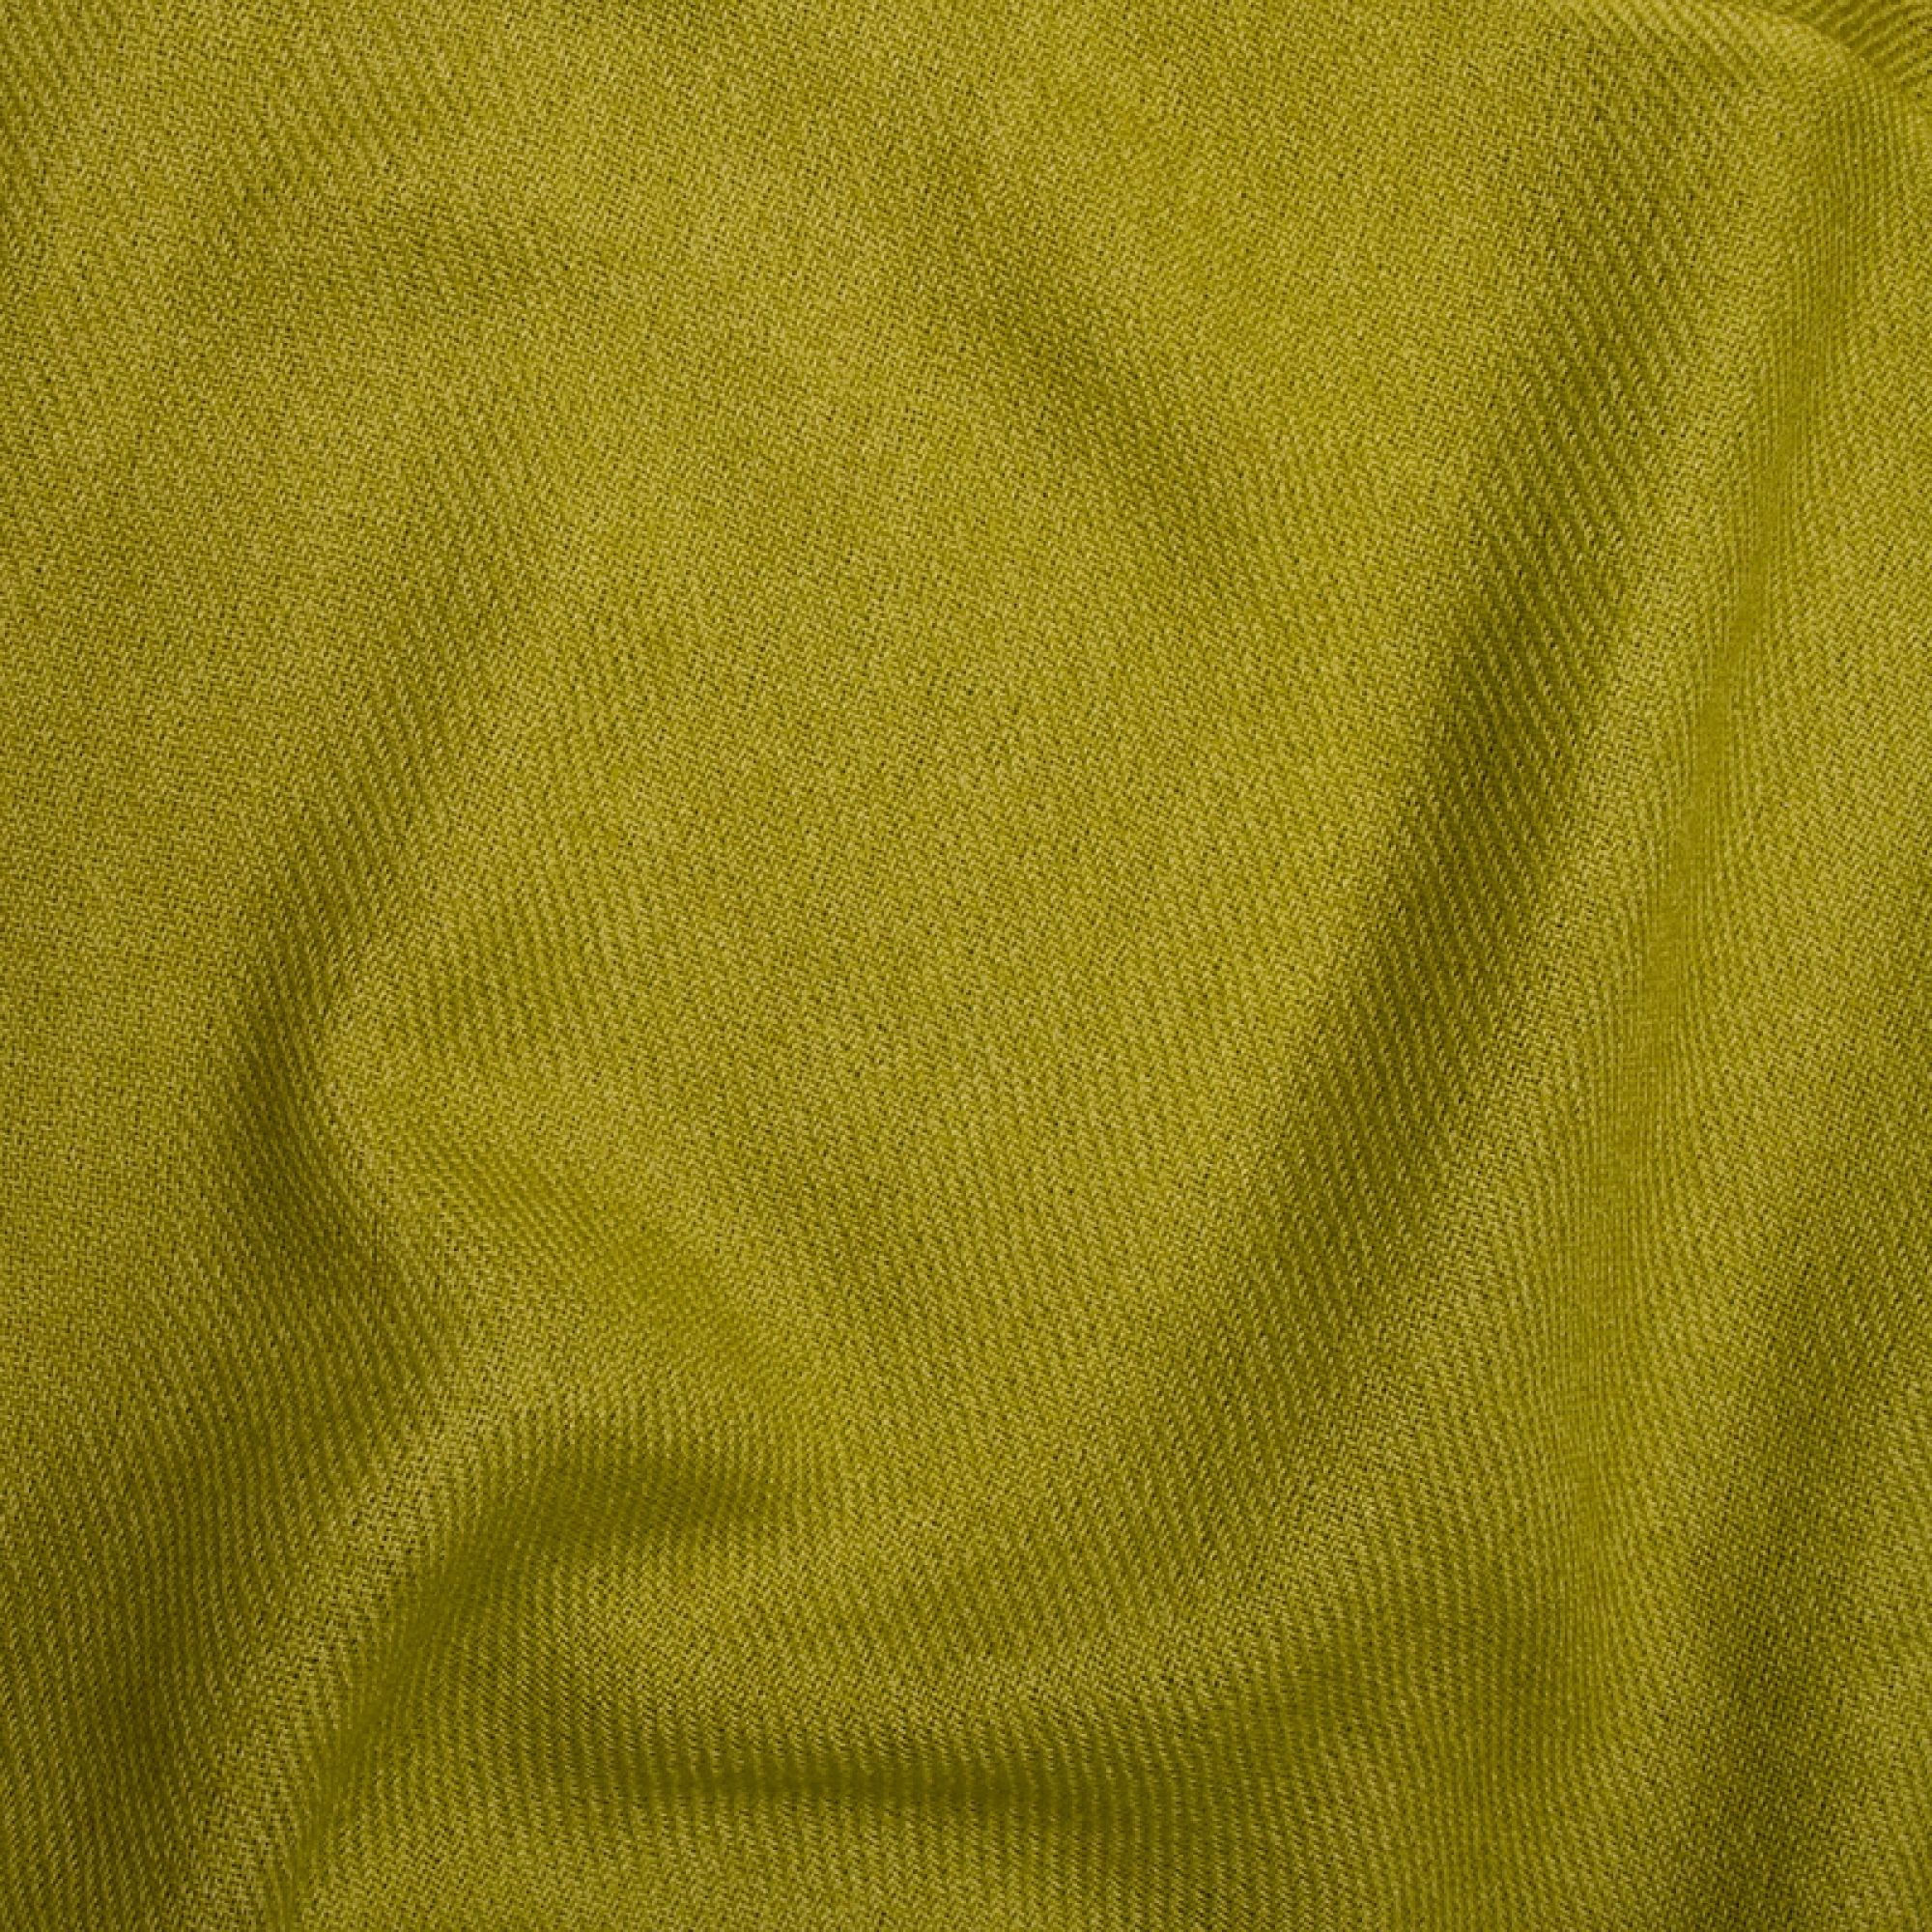 Cashmere accessories blanket toodoo plain l 220 x 220 lime punch 220x220cm